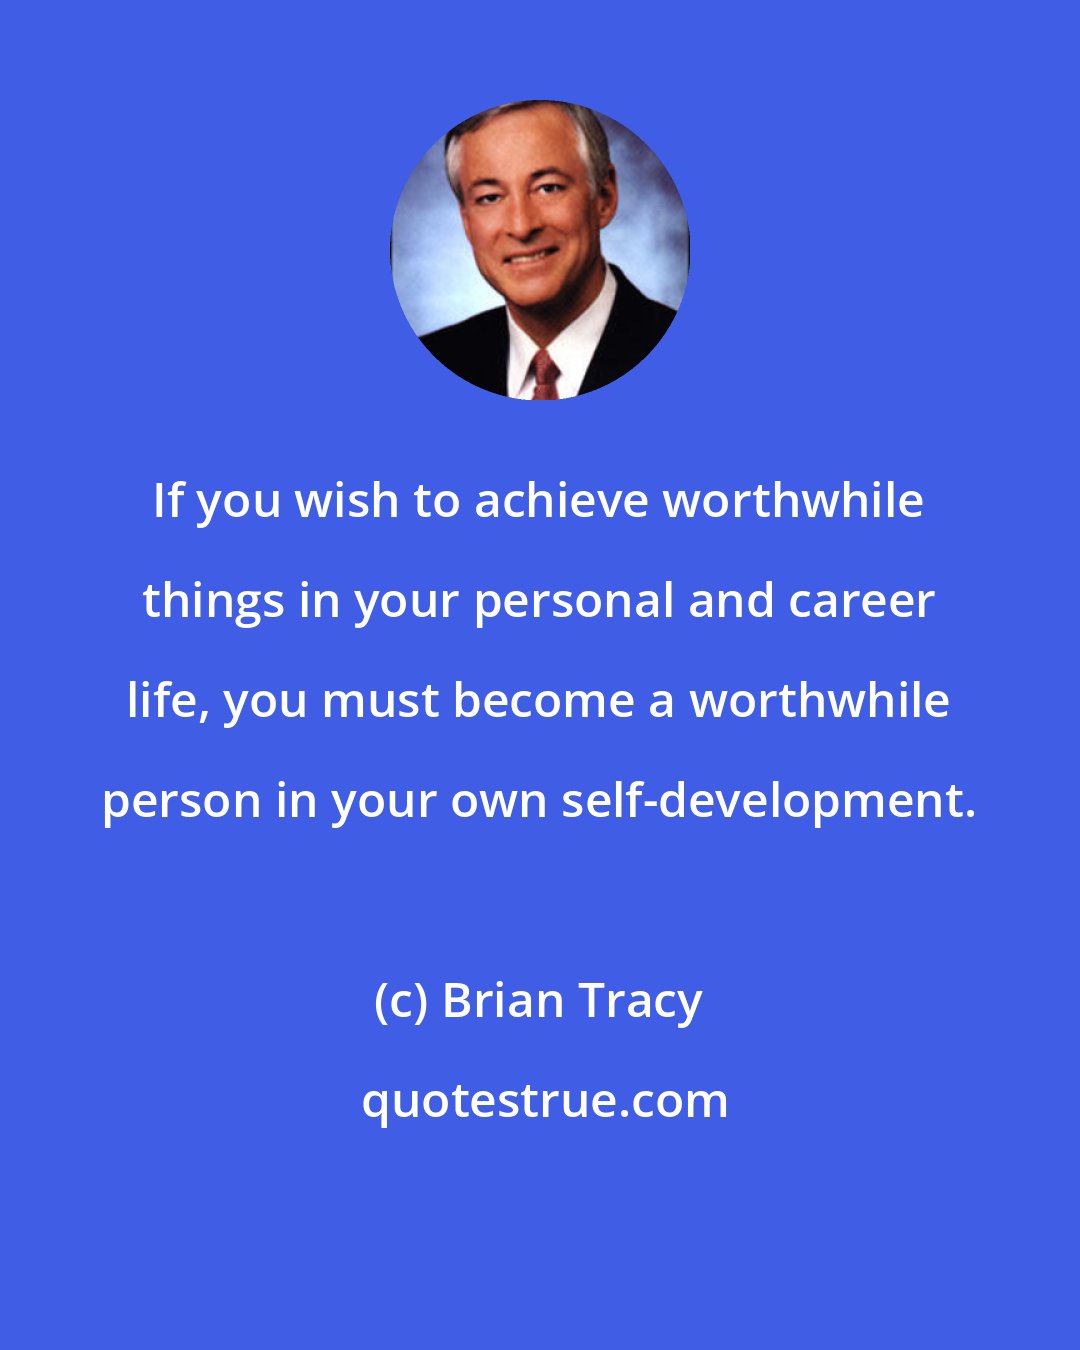 Brian Tracy: If you wish to achieve worthwhile things in your personal and career life, you must become a worthwhile person in your own self-development.